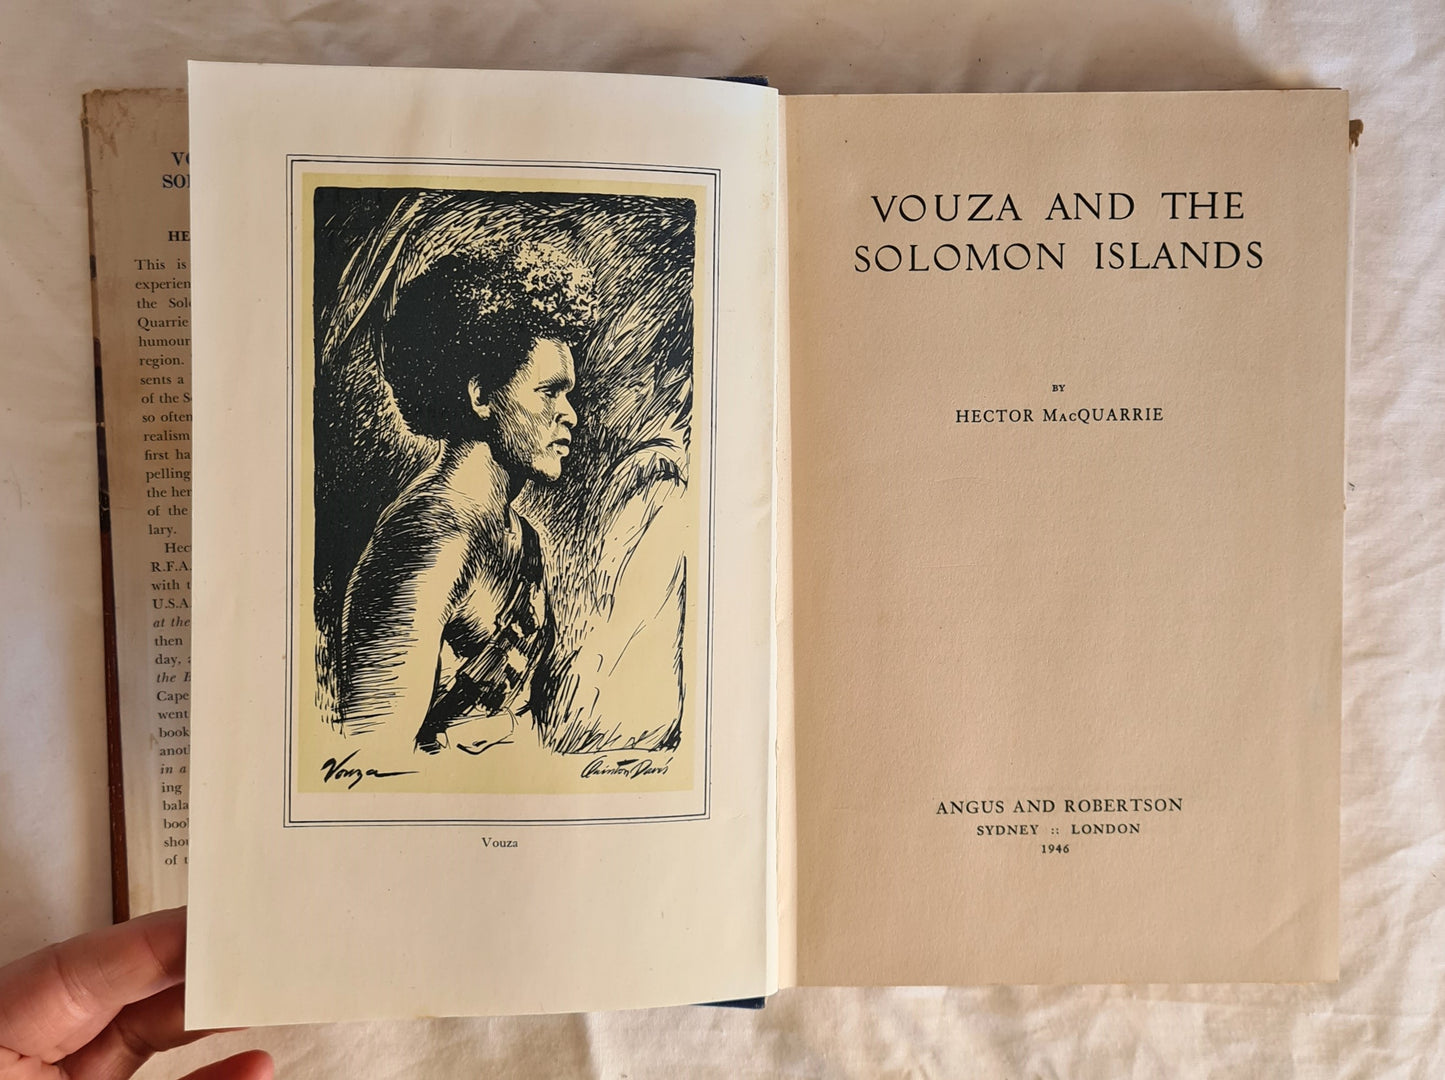 Vouza and the Solomon Islands by Hector MacQuarrie